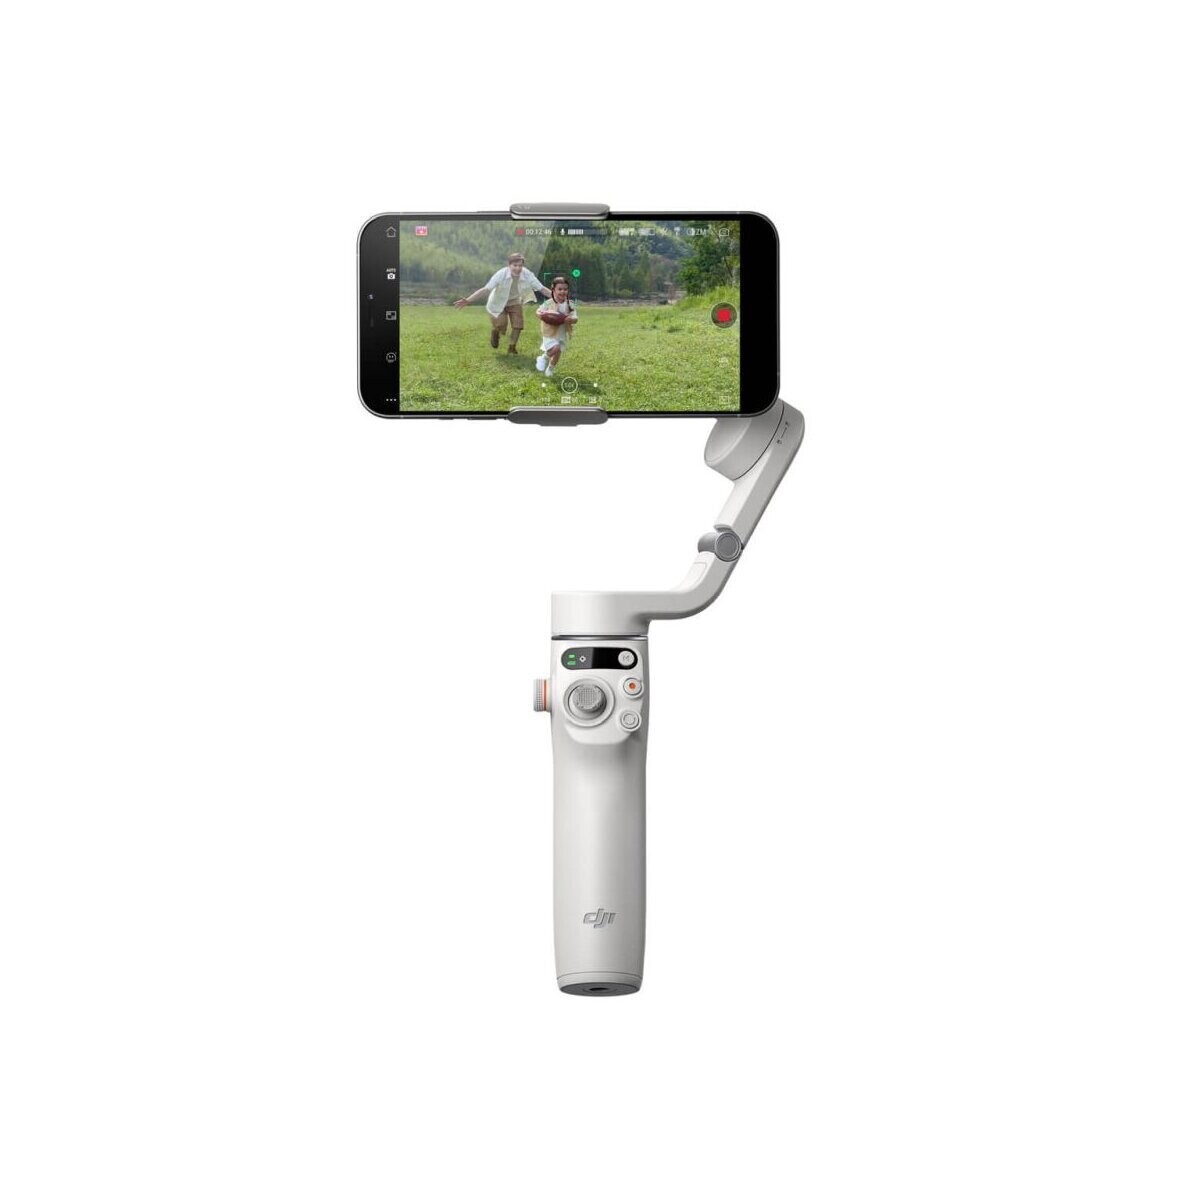 DJI Osmo Mobile 6 - 3 Axis Mobile Stabilizer, Color: Platinum Gray